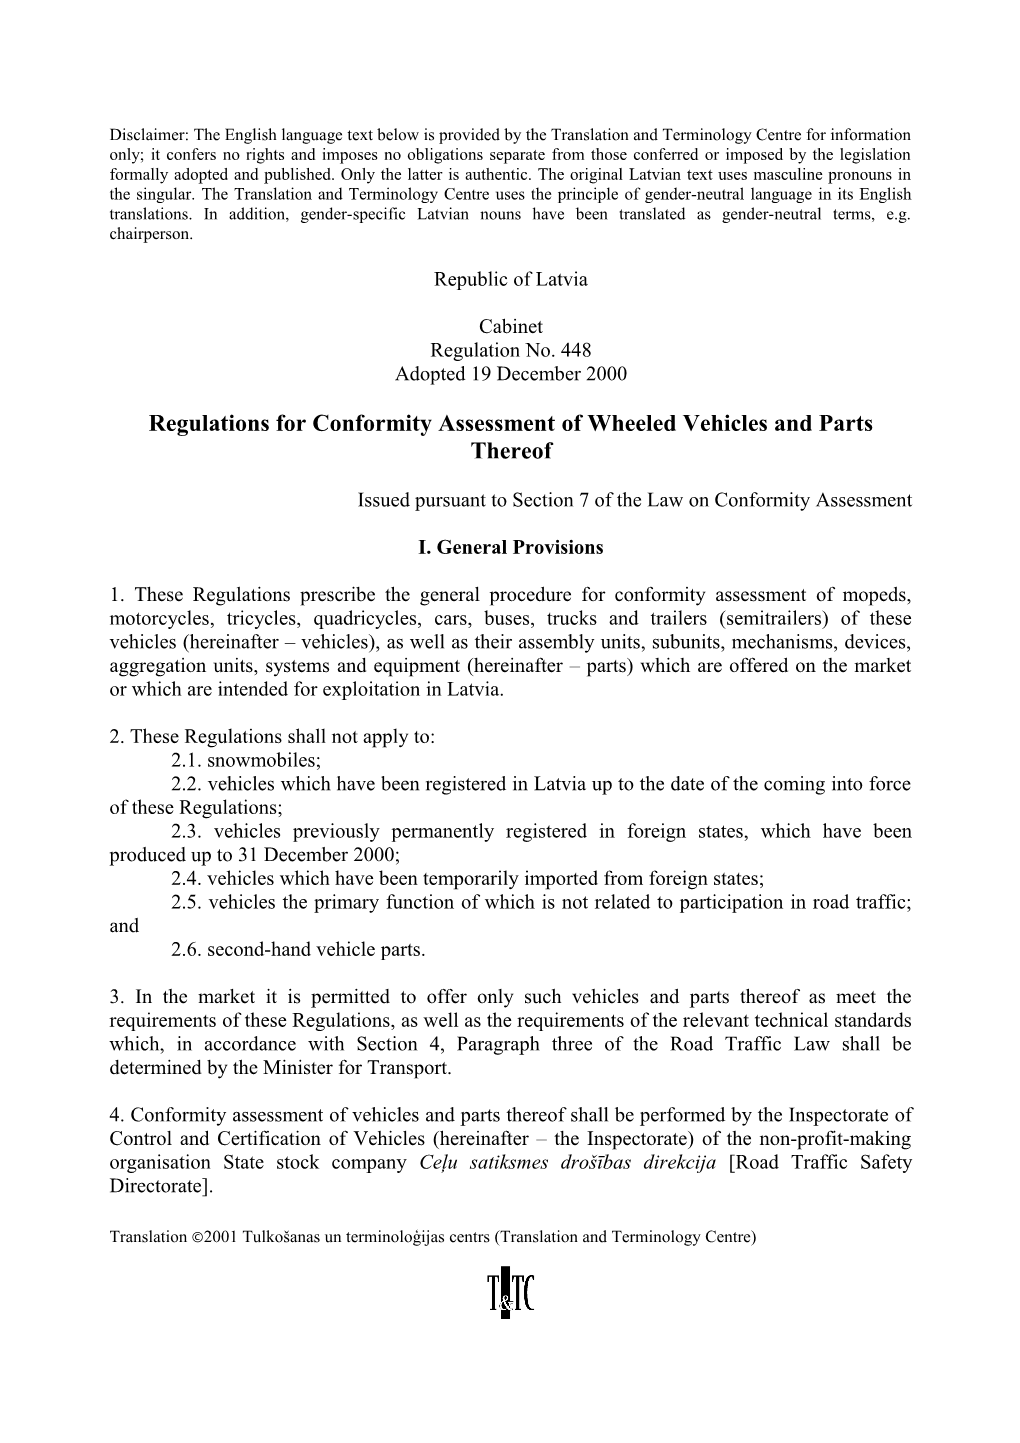 Regulations for Conformity Assessment of Wheeled Vehicles and Parts Thereof